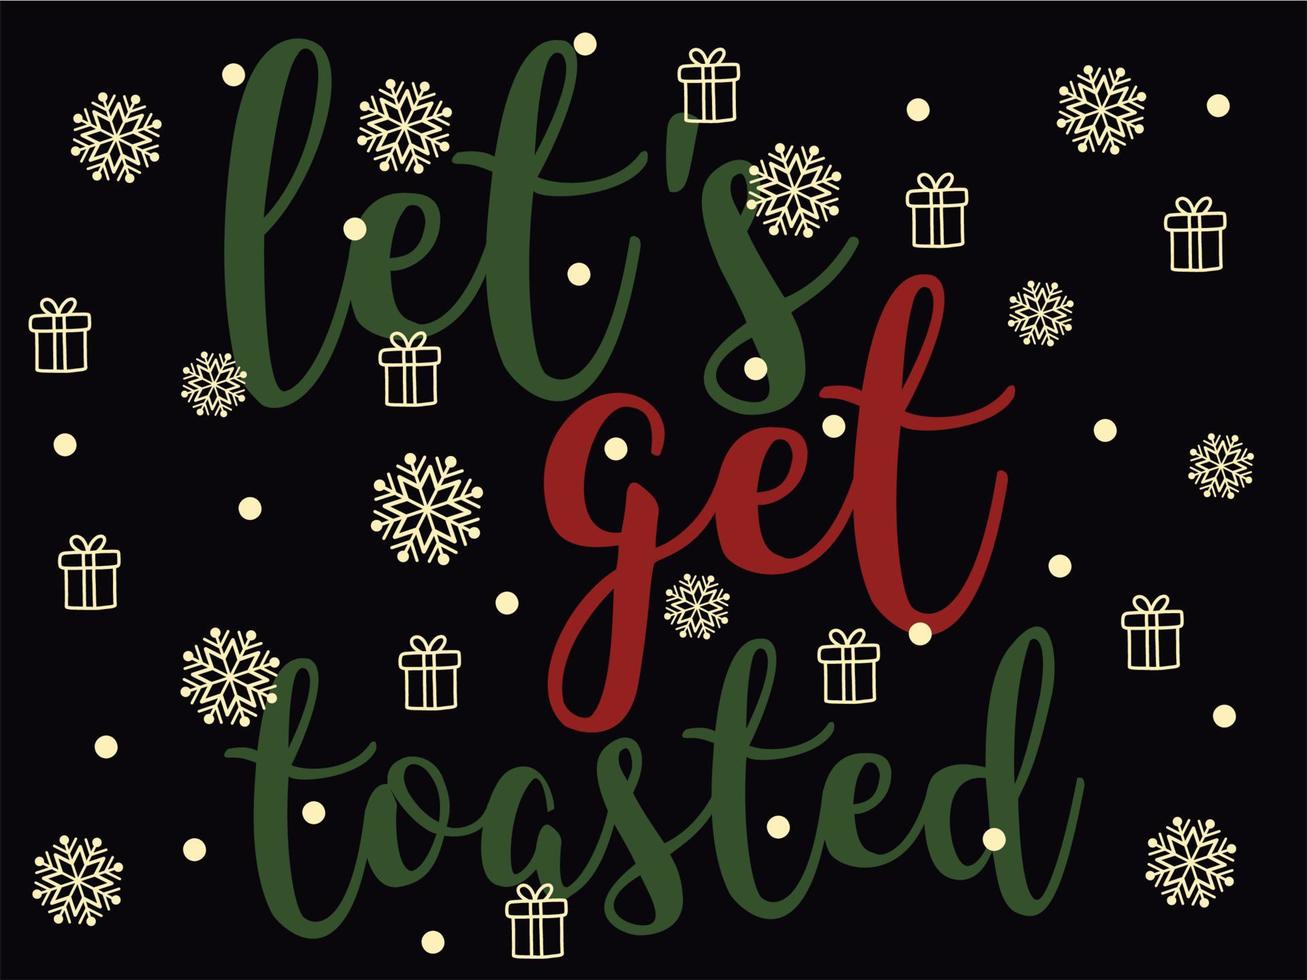 Let's get Toasted 02 Merry Christmas and Happy Holidays Typography set vector